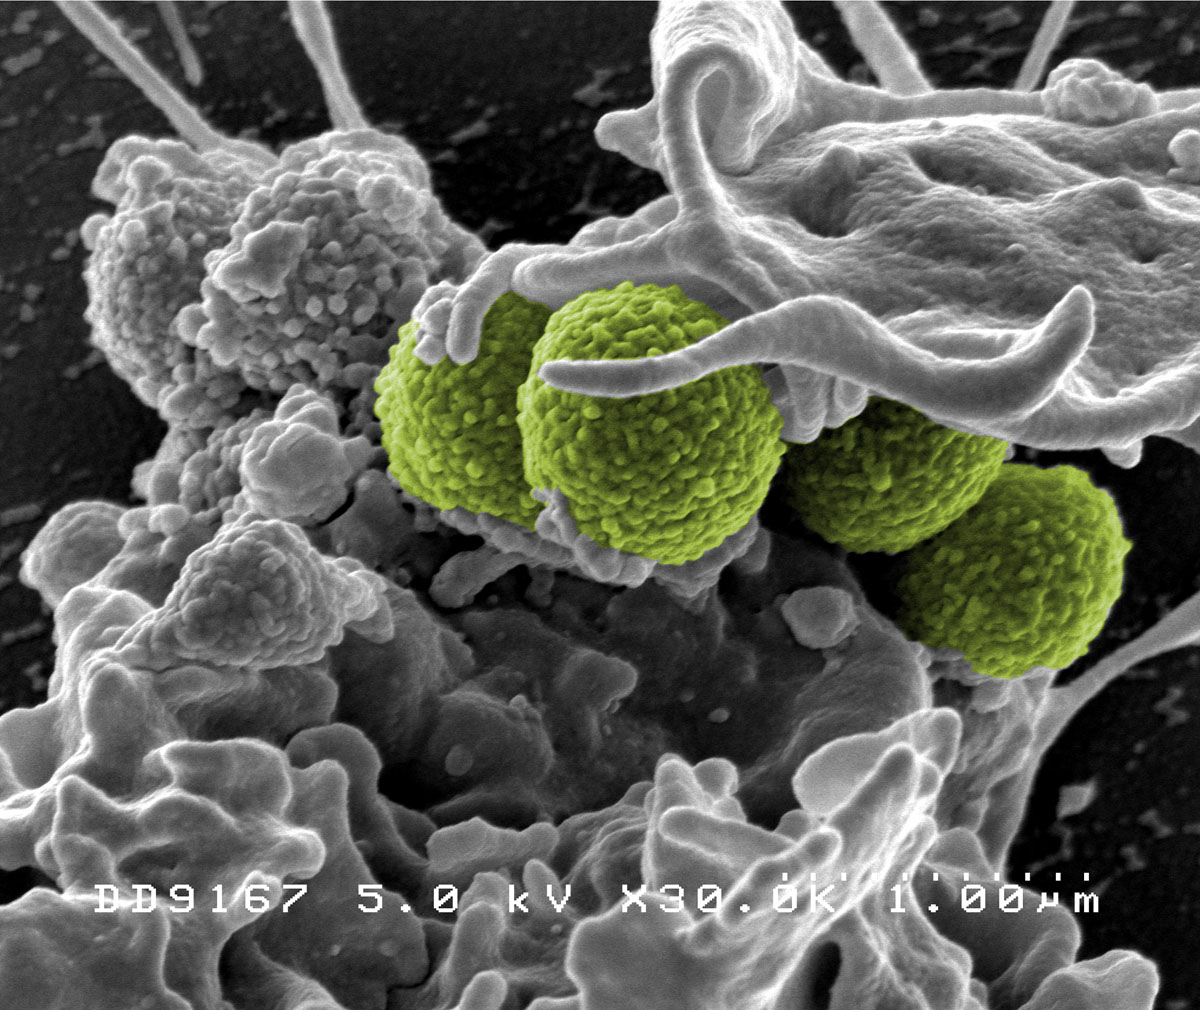 The spread of a drug-resistant form of Methicillin-resistant Staphylococcus aureus (MRSA; pictured above) has captured headlines in recent years, exacerbating fears of an antimicrobial-resistance crisis. Photo: NIAID/NIH.